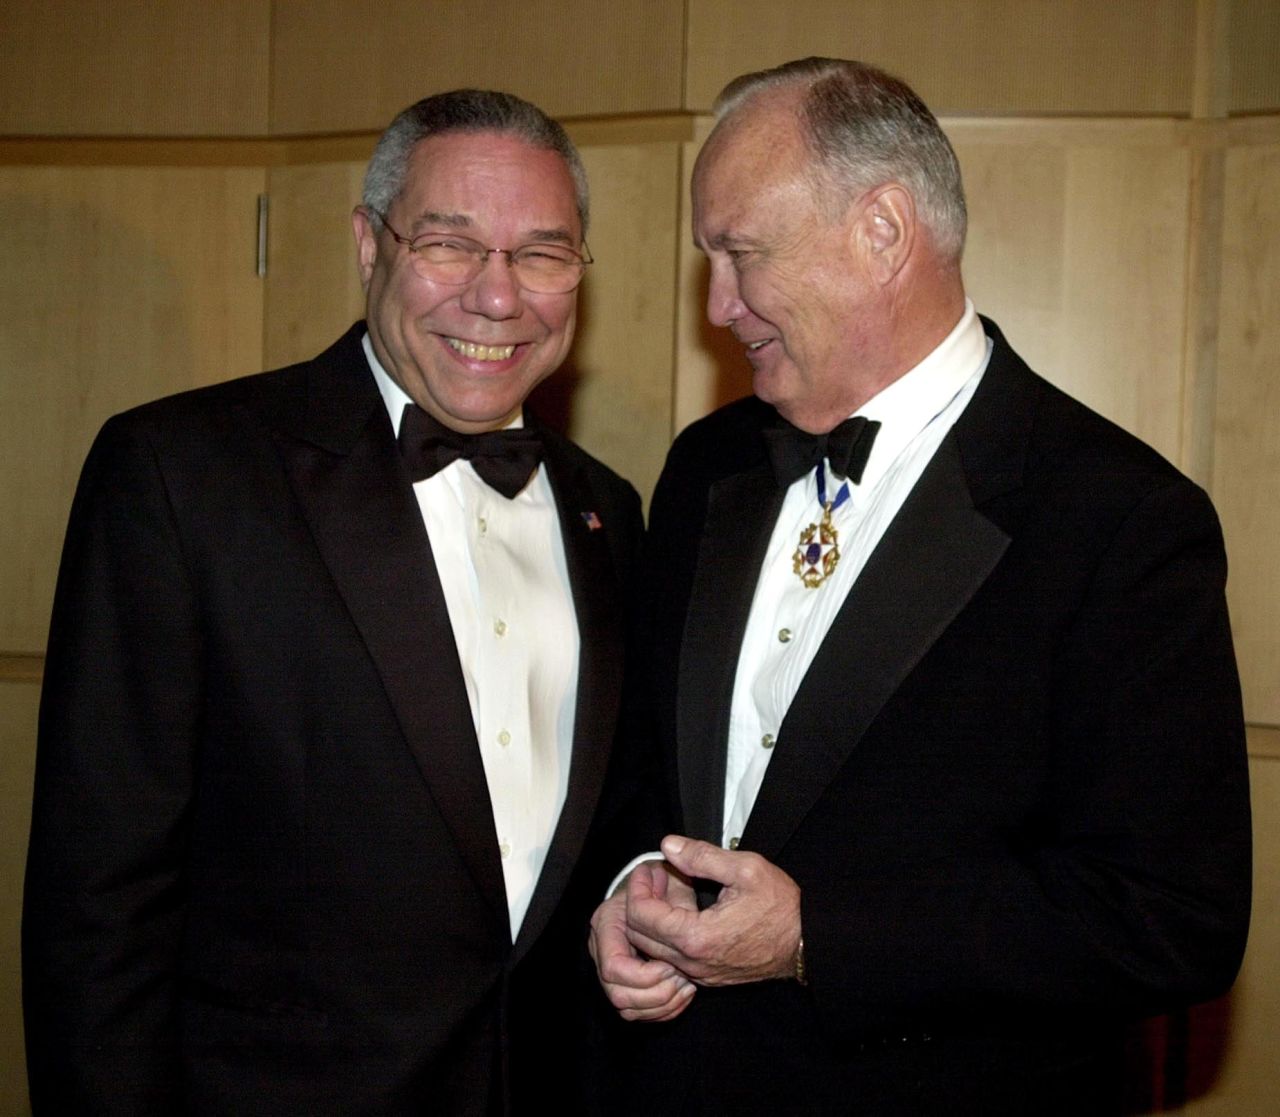 U.S. Secretary of State Colin Powell talks with Schwarzkopf on December 6, 2002, during a receptionbefore the American Patriot Award Dinner in Washington. The dinner honored former U.S. President George H. W. Bush.